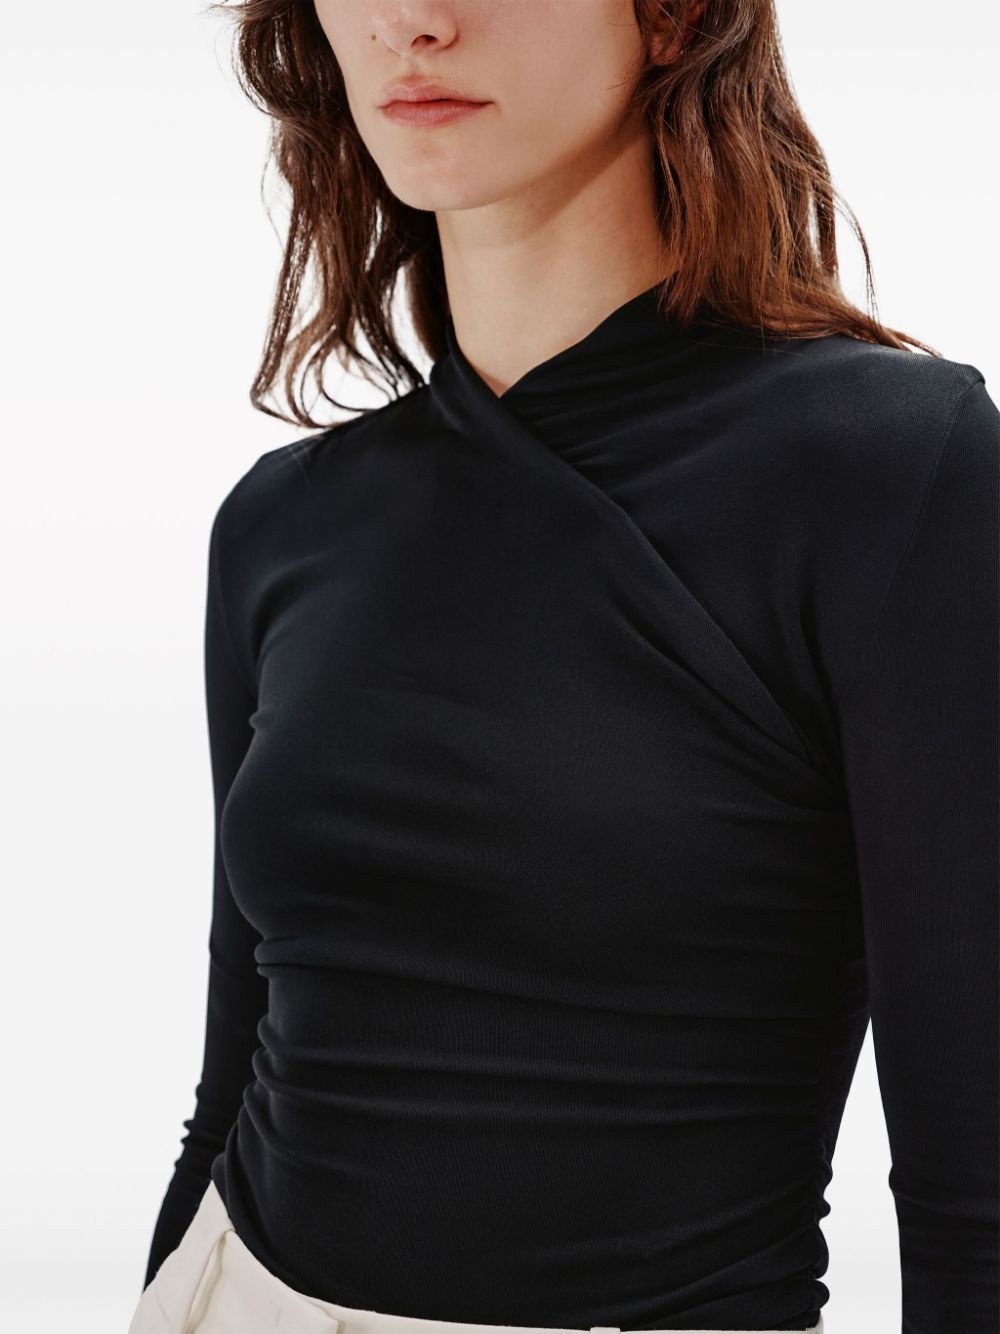 crossover-neck long-sleeve top - 6